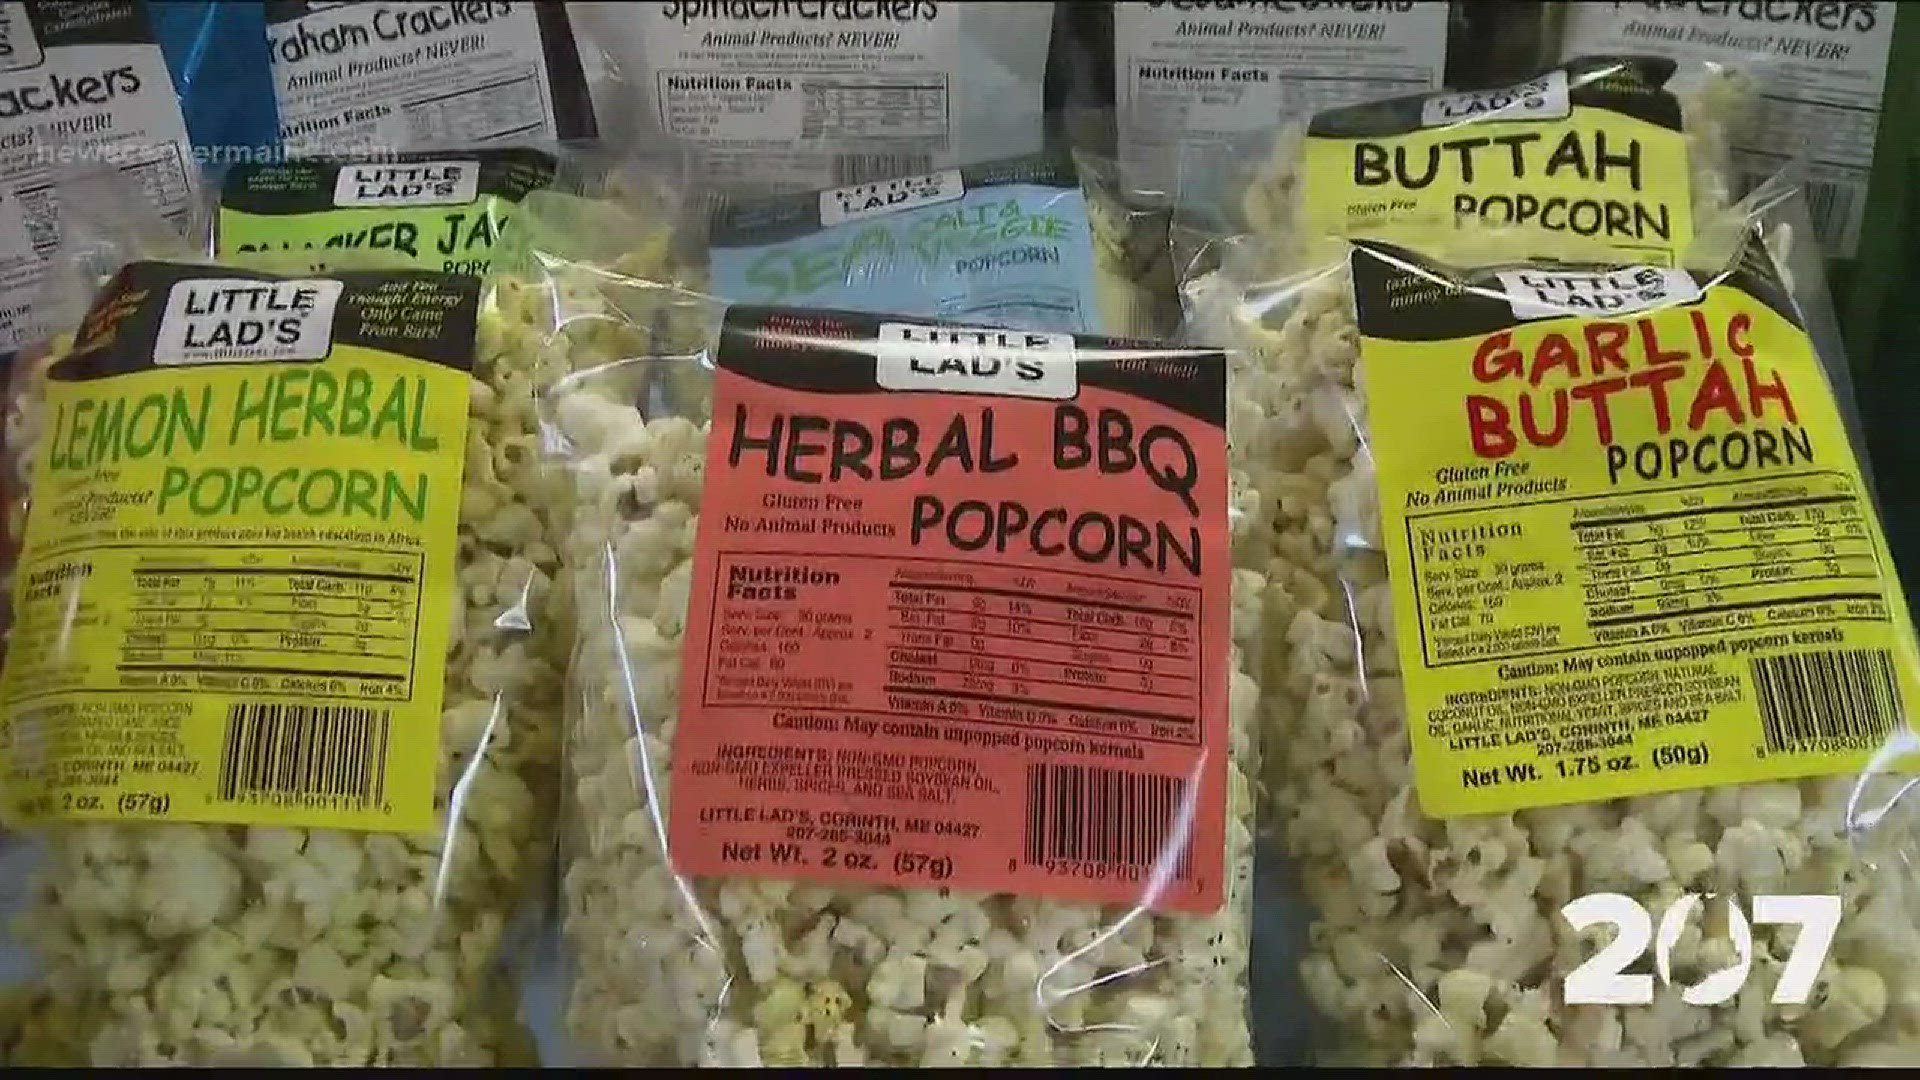 The story behind the popcorn that makes men cry when the bag goes dry.